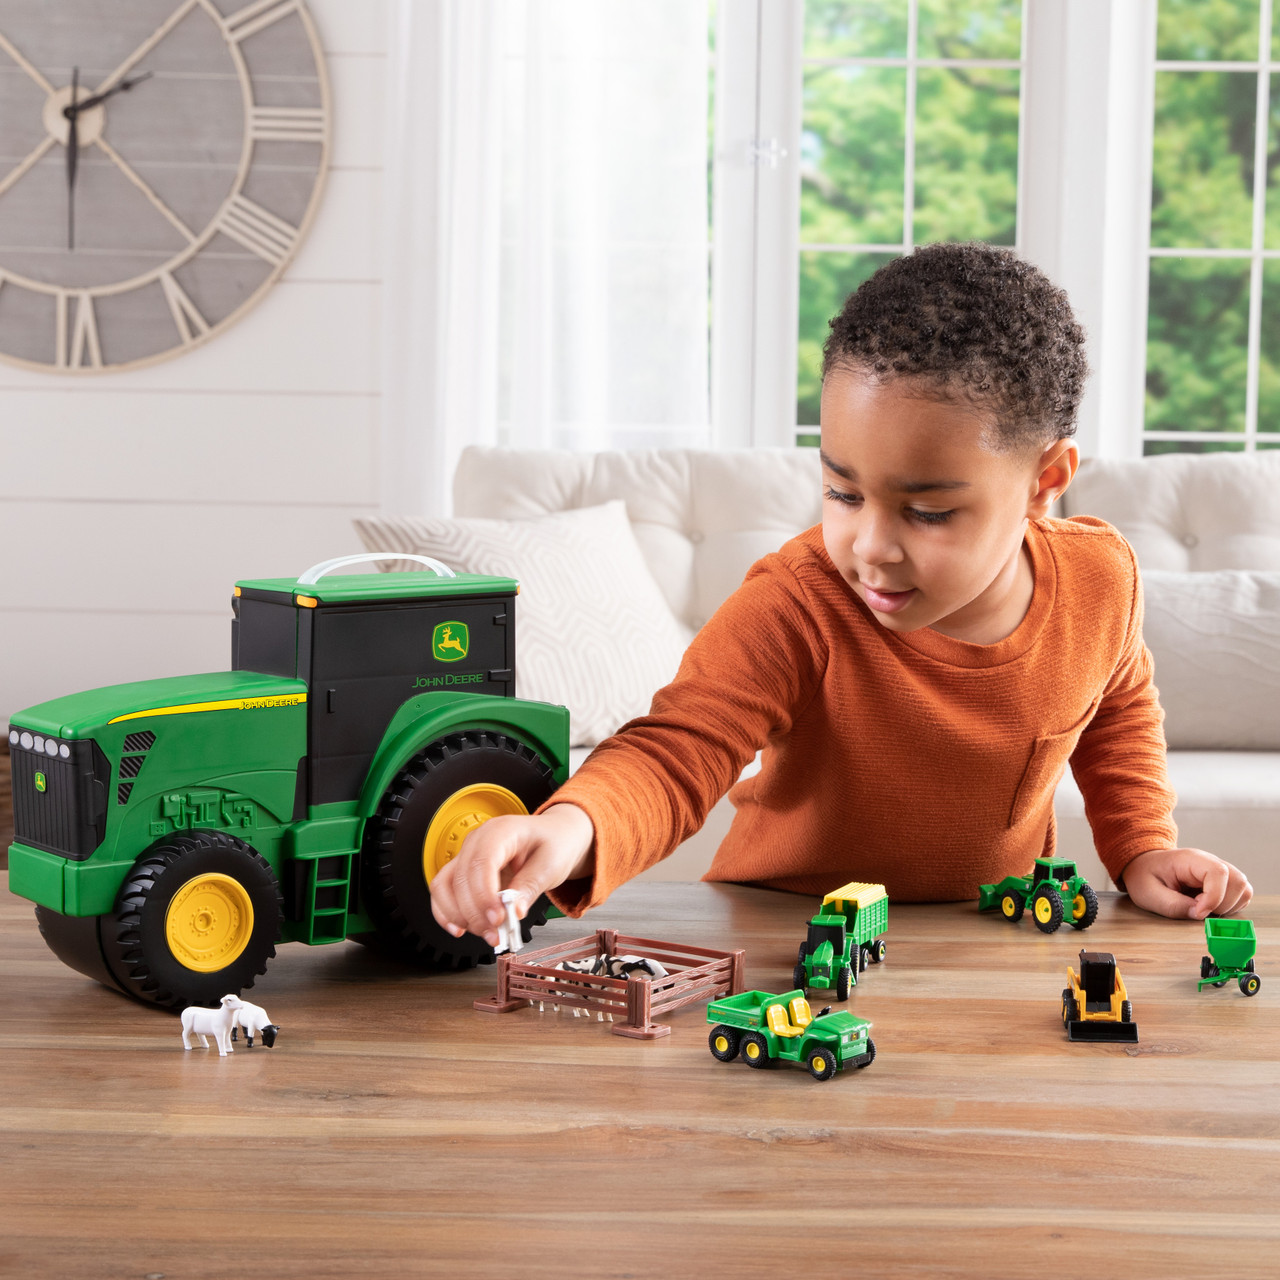 ankel Hævde hård John Deere Fun on the Go Tractor Case - Farm Toy Collection with Farm  Vehicles, Animals, Accessories and Travel Case